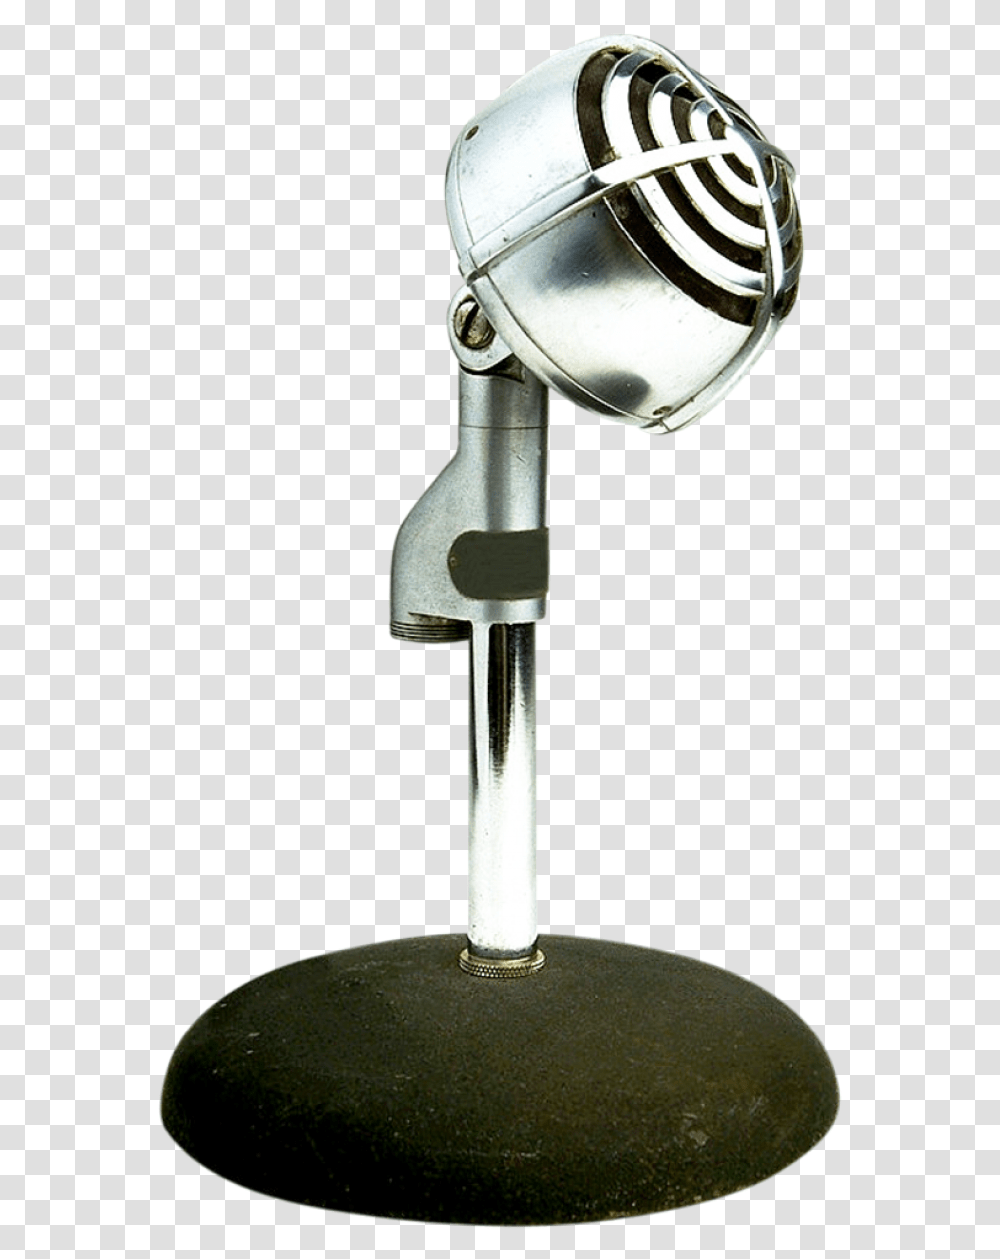 Vintage Microphone Image Portable Network Graphics, Lighting, Microscope, Electrical Device, Spotlight Transparent Png